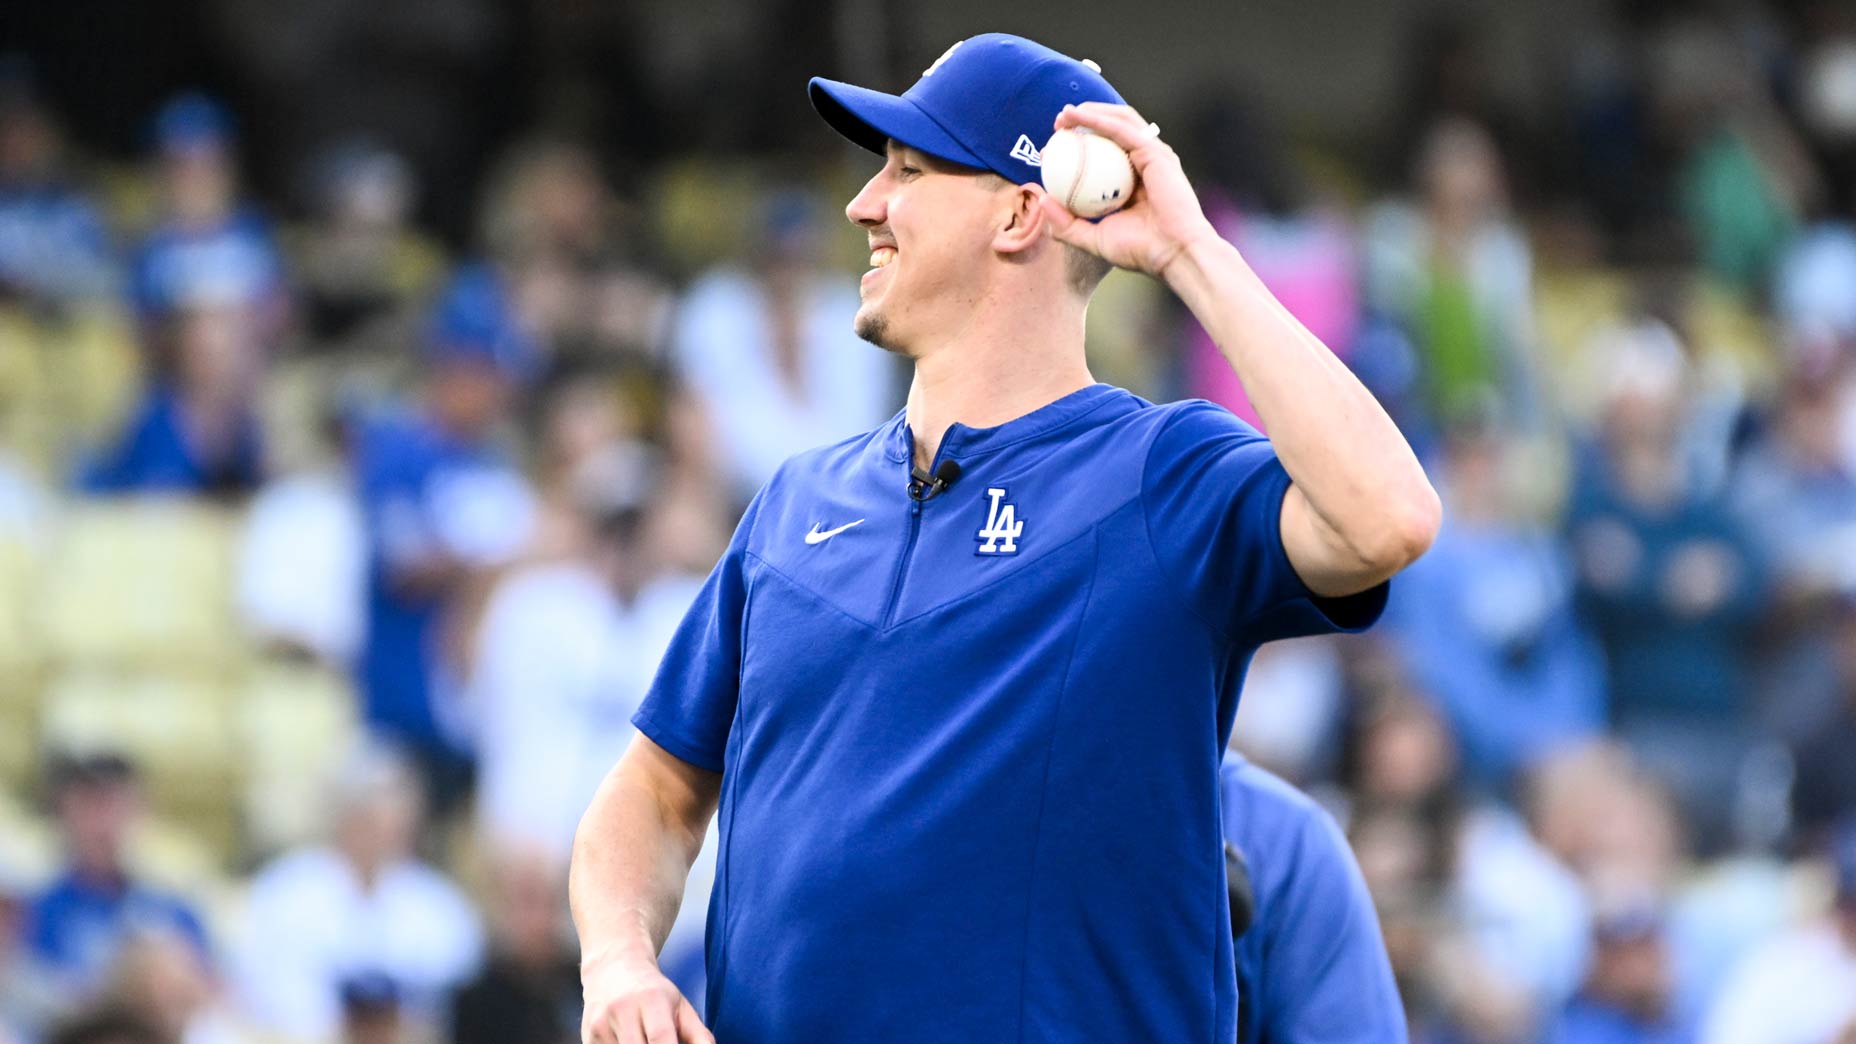 Los Angeles Dodgers Walker Buehler throws out the first pitch before game two of the NLDS against the San Diego Padres at Dodger Stadium on Wednesday, Oct. 12, 2022 in Los Angeles, CA.